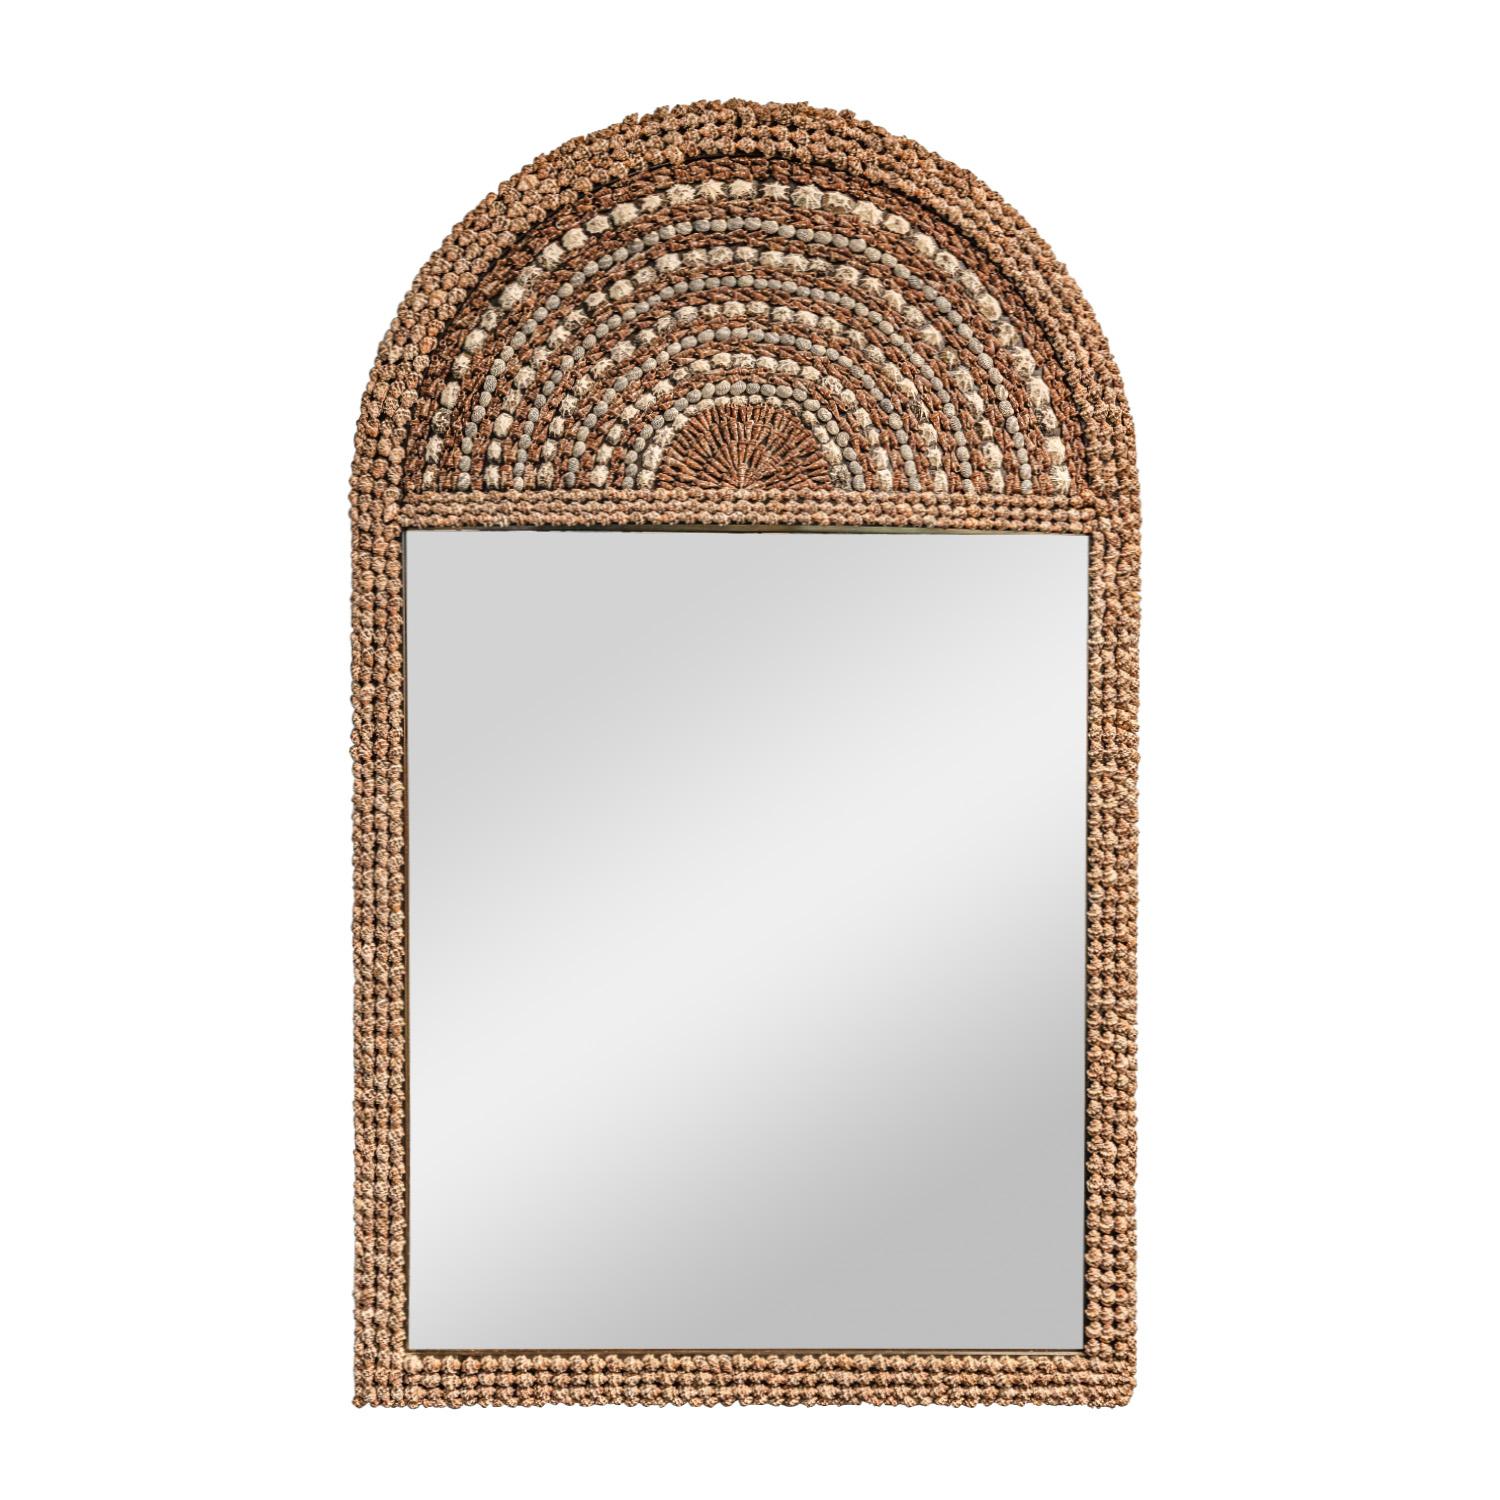 Rare large and exceptional wall-hanging arc top mirror covered with sea shells arranged in a beautiful concentric pattern by Karl Springer, American 1970's.  This piece is meticulously crafted and an early Springer design.   The scale of this mirror